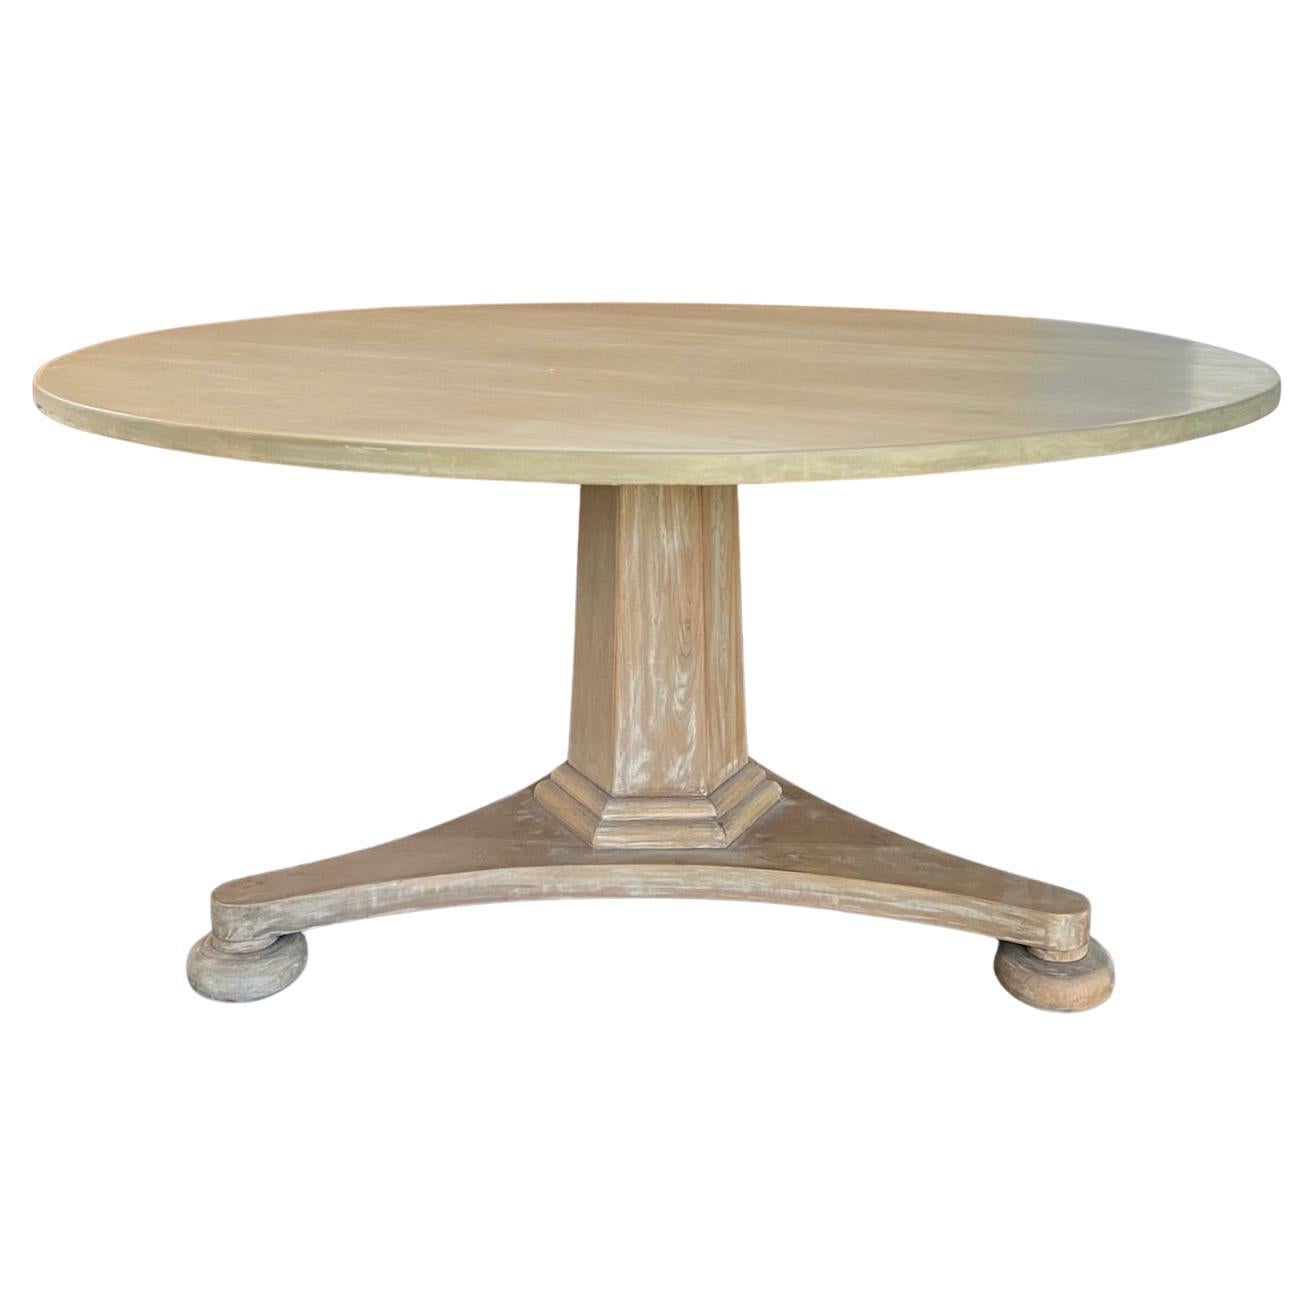 Contemporary Swedish Style Pedestal Dining Table